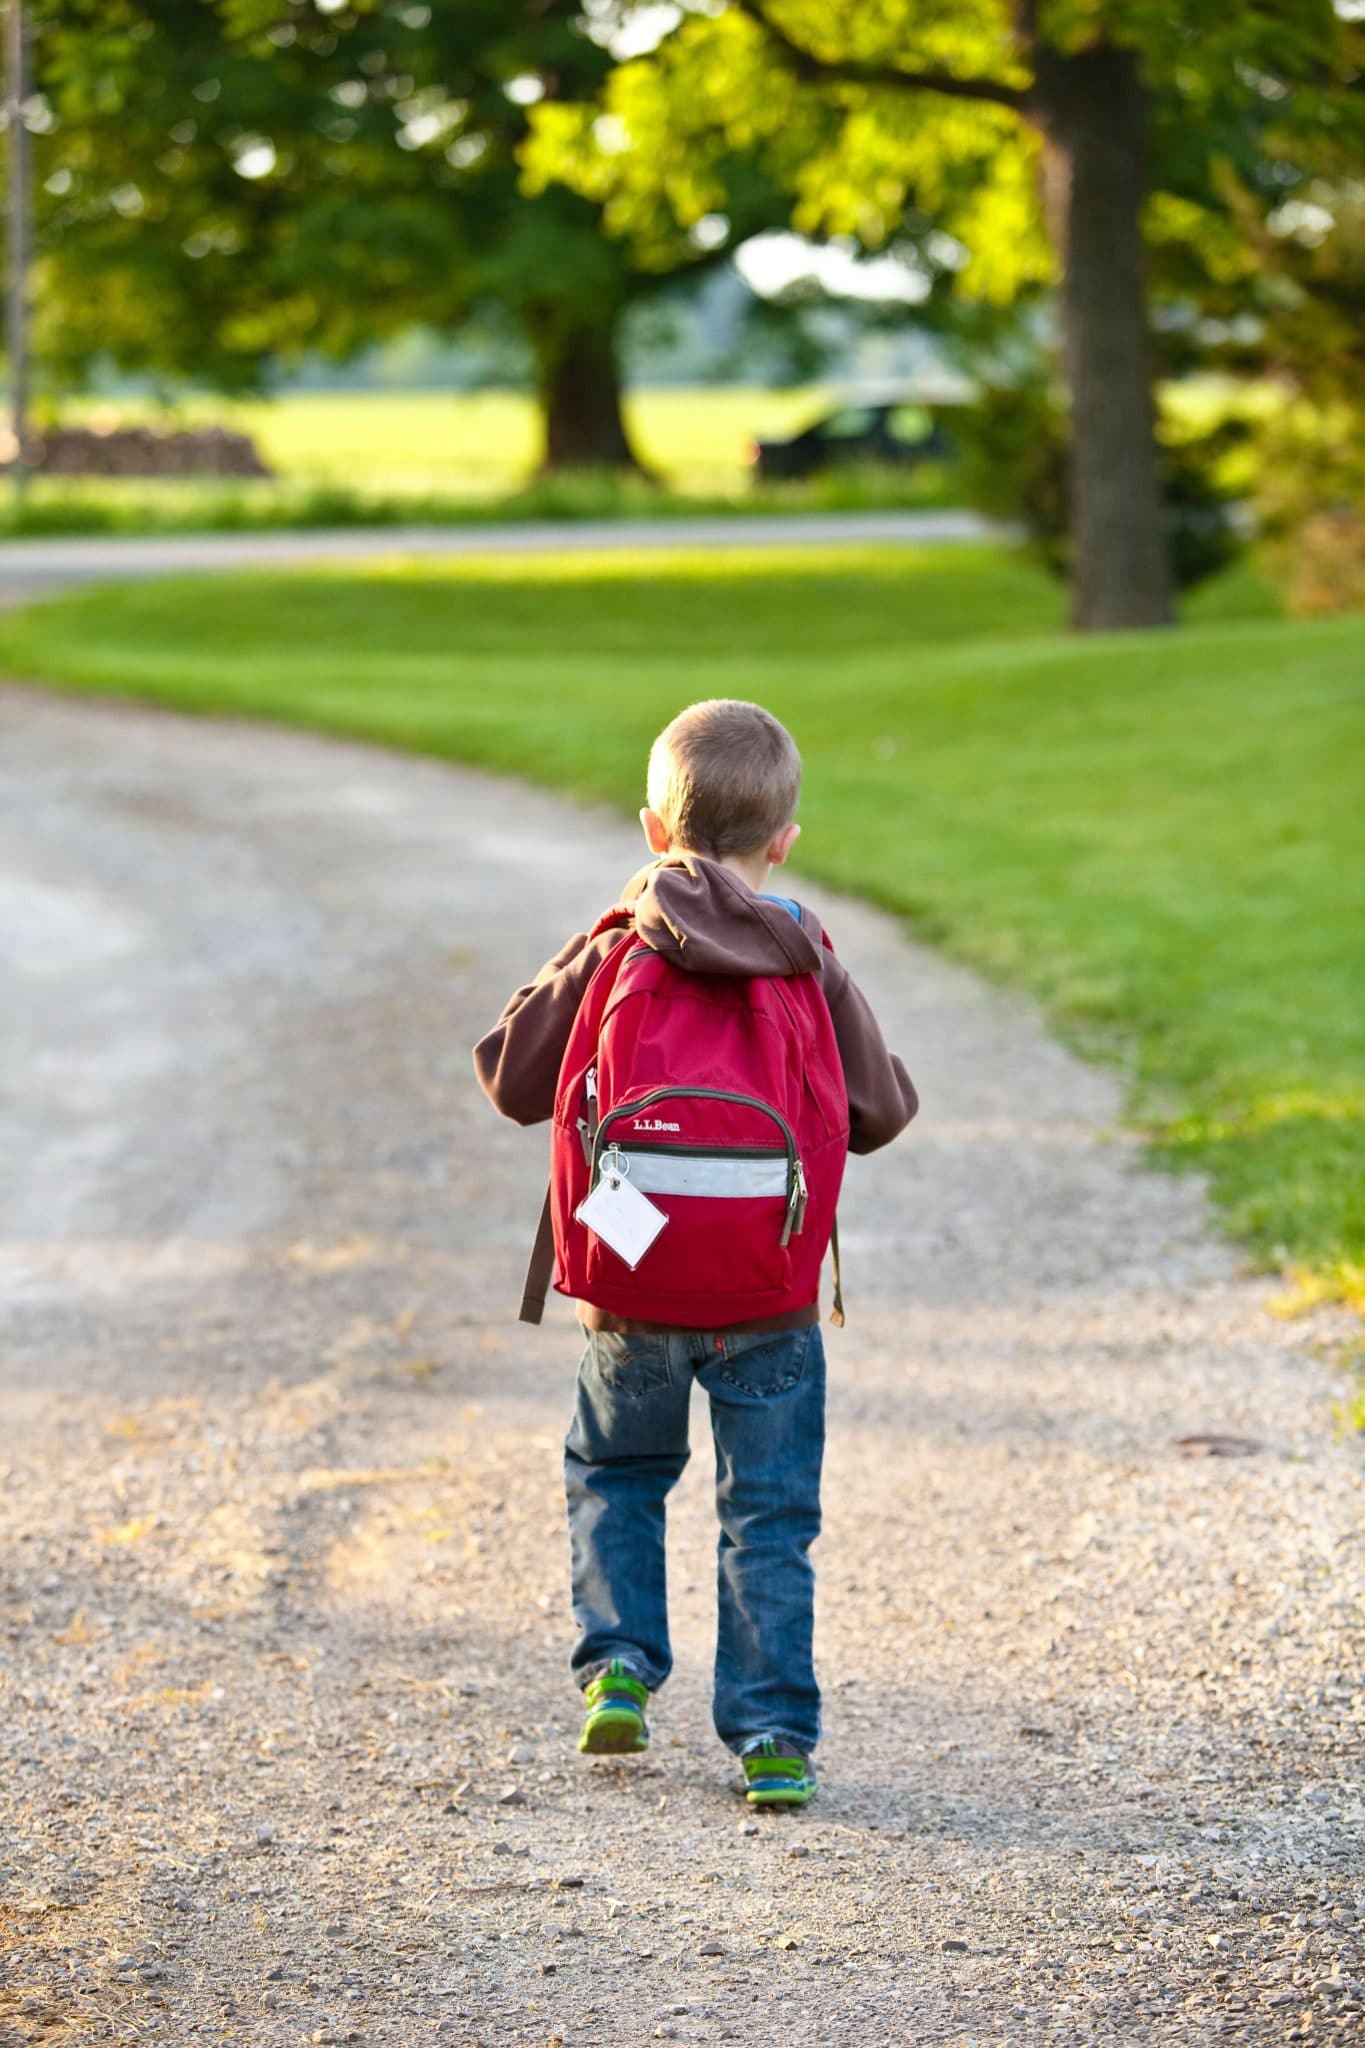 A young boy on his way to school with a new knapsack on his back